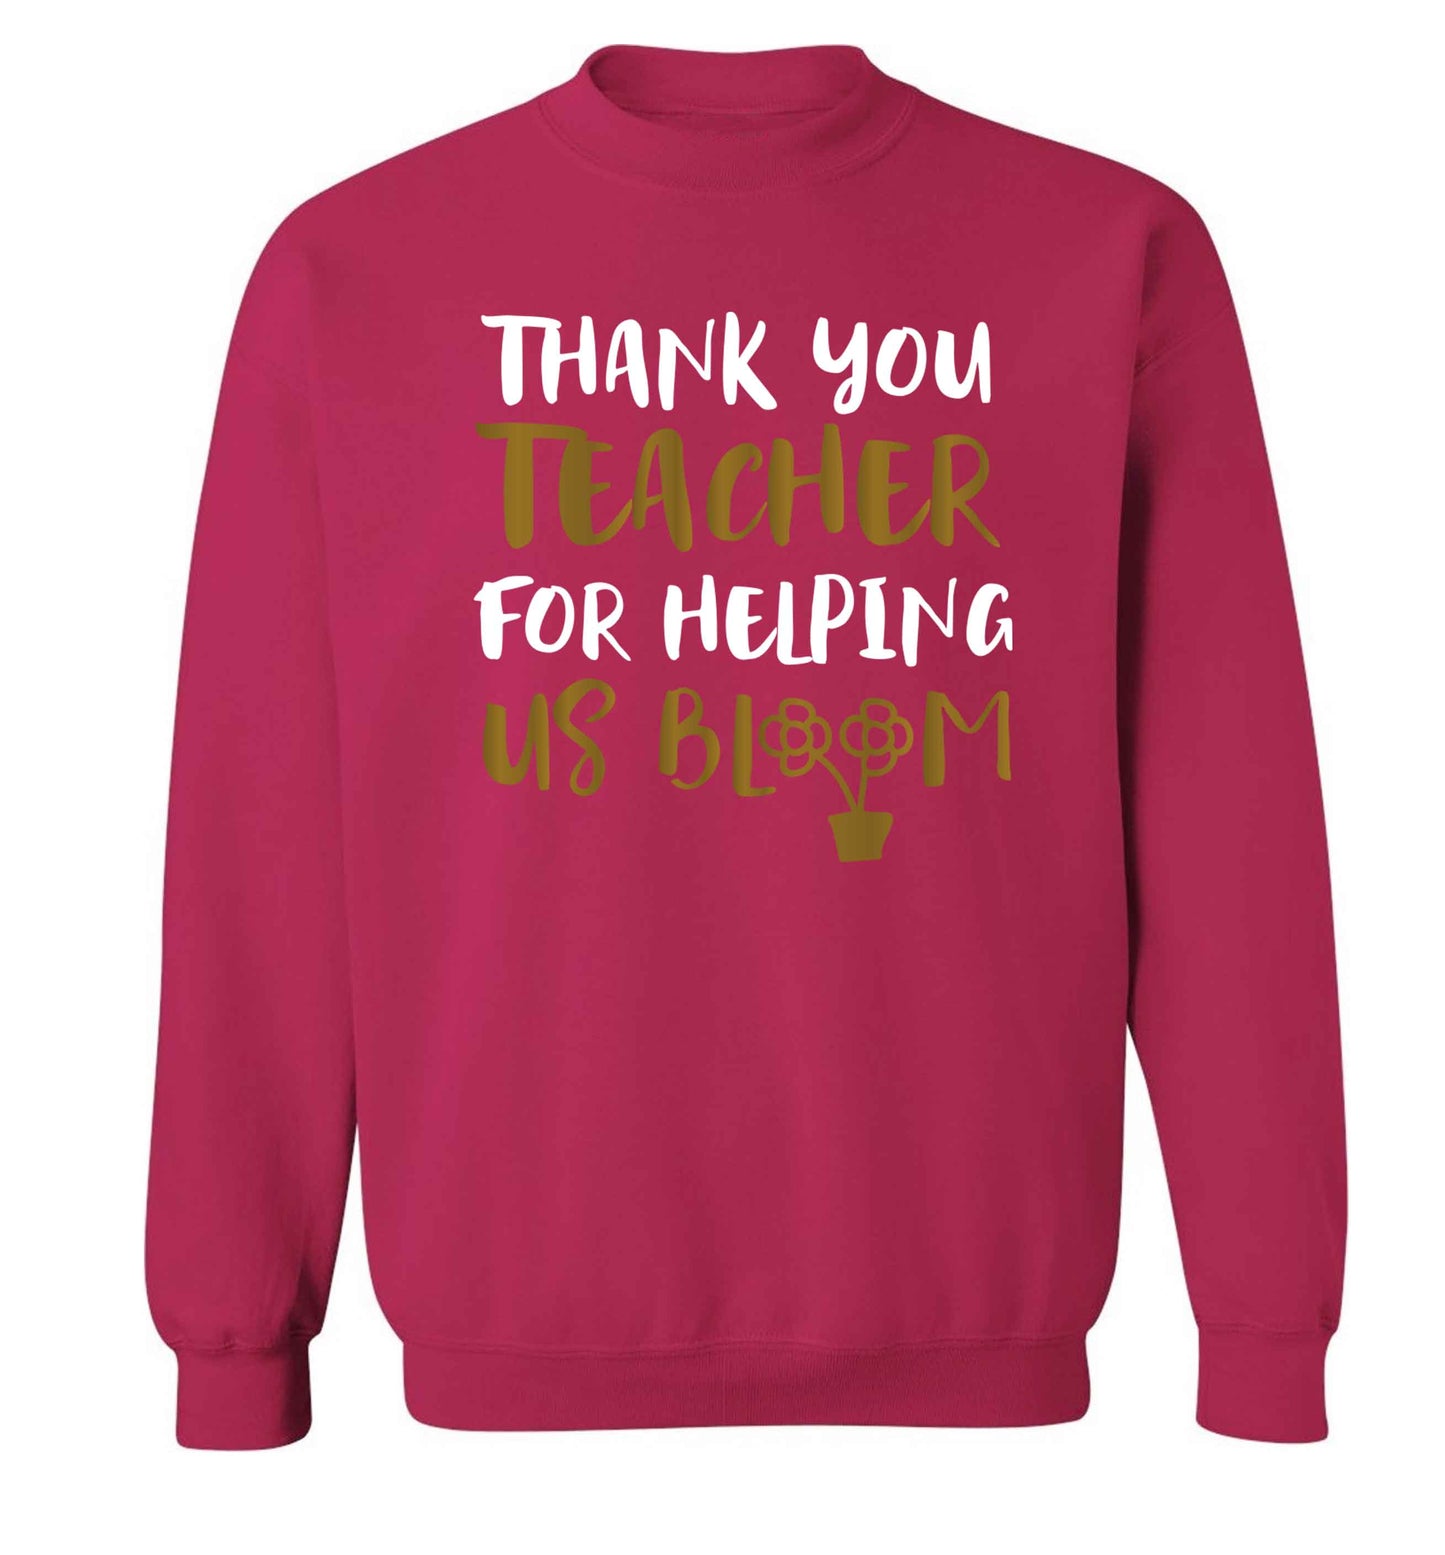 Thank you teacher for helping us bloom Adult's unisex pink Sweater 2XL